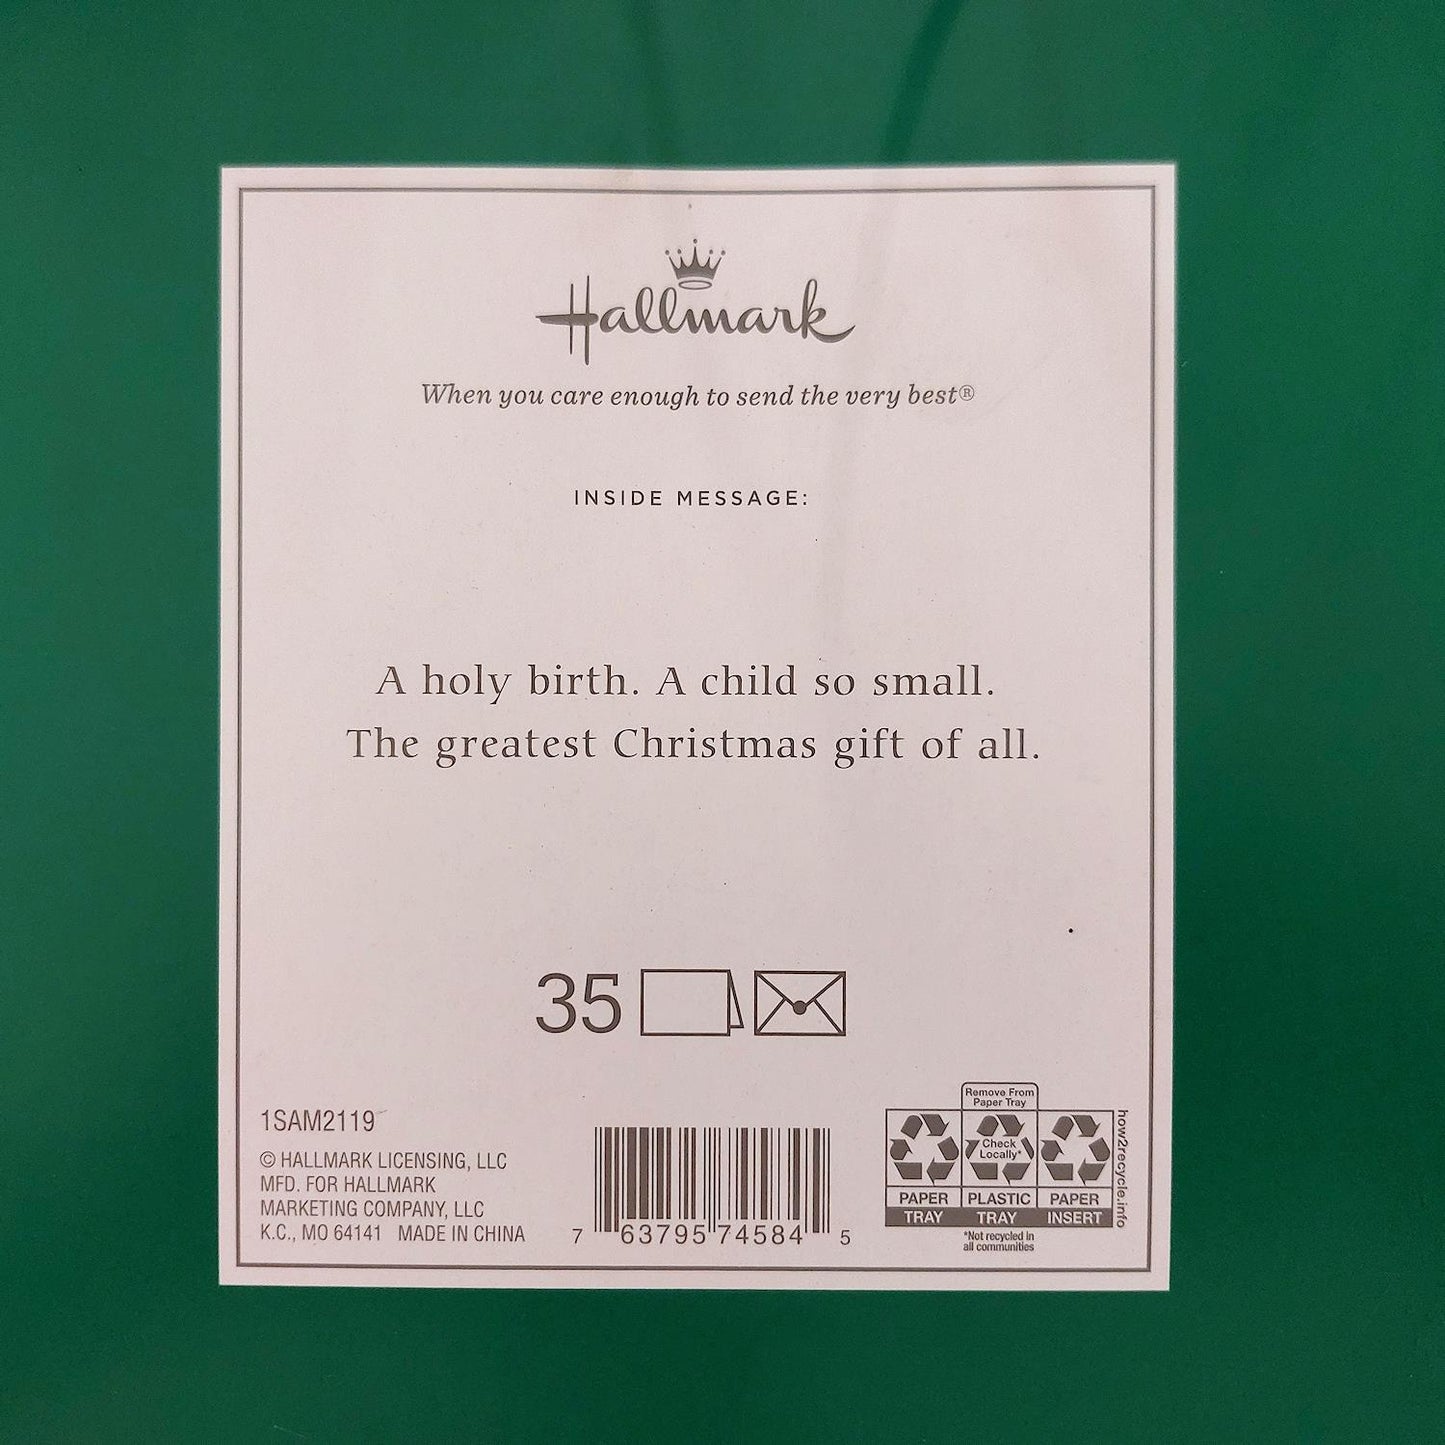 Hallmark Boxed Deluxe Christmas Cards Blessed by the Season Religious 35 Cards, Designed Self-Sealing Envelopes and Seals